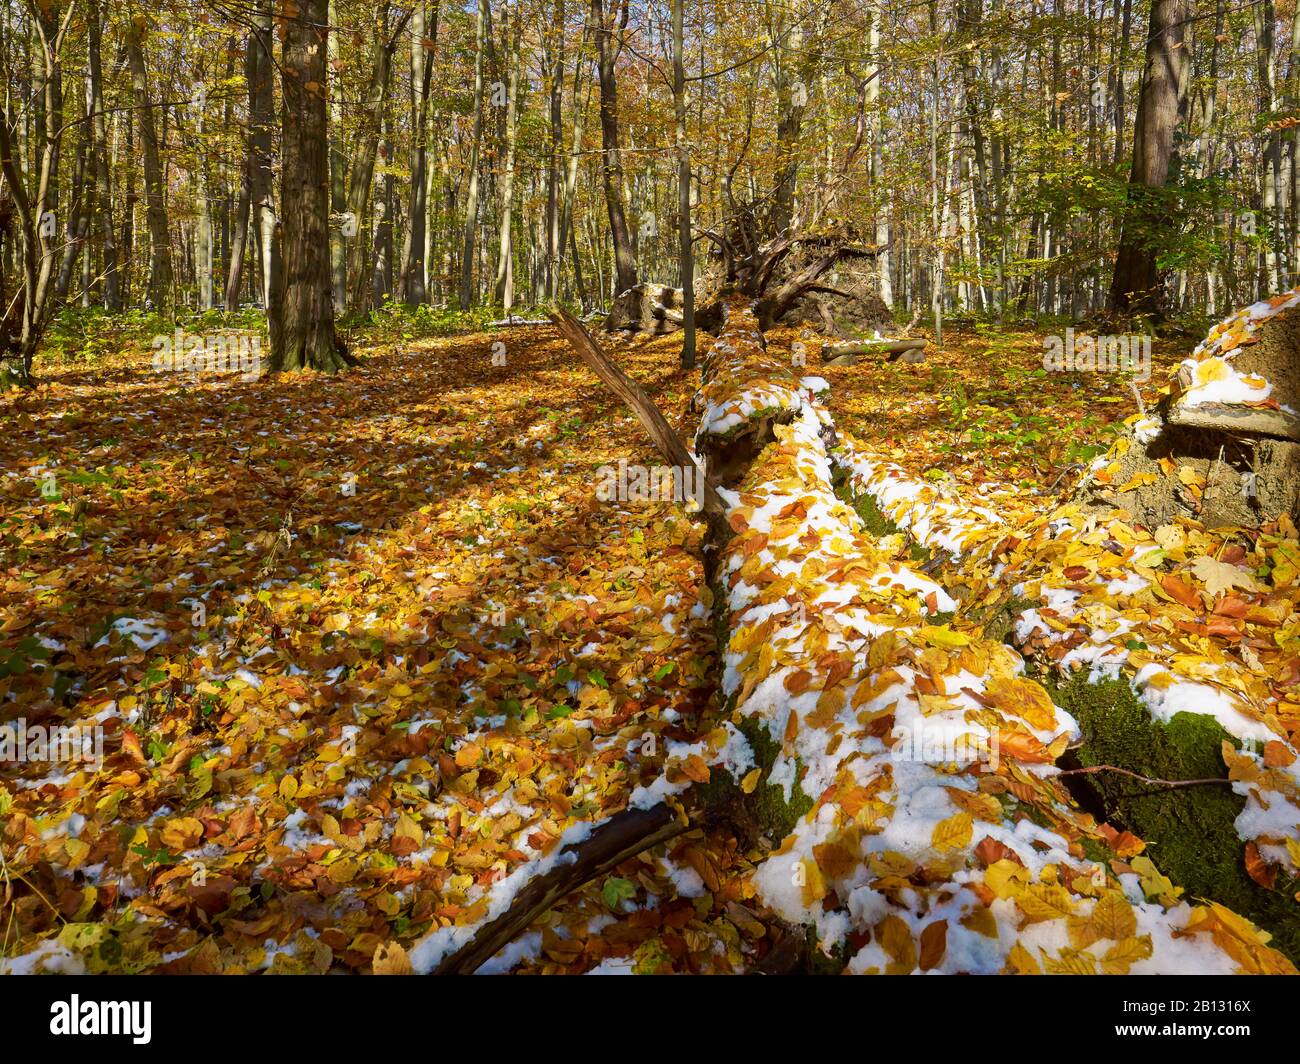 Overturned tree at Hainich National Park,Thuringia,Germany Stock Photo